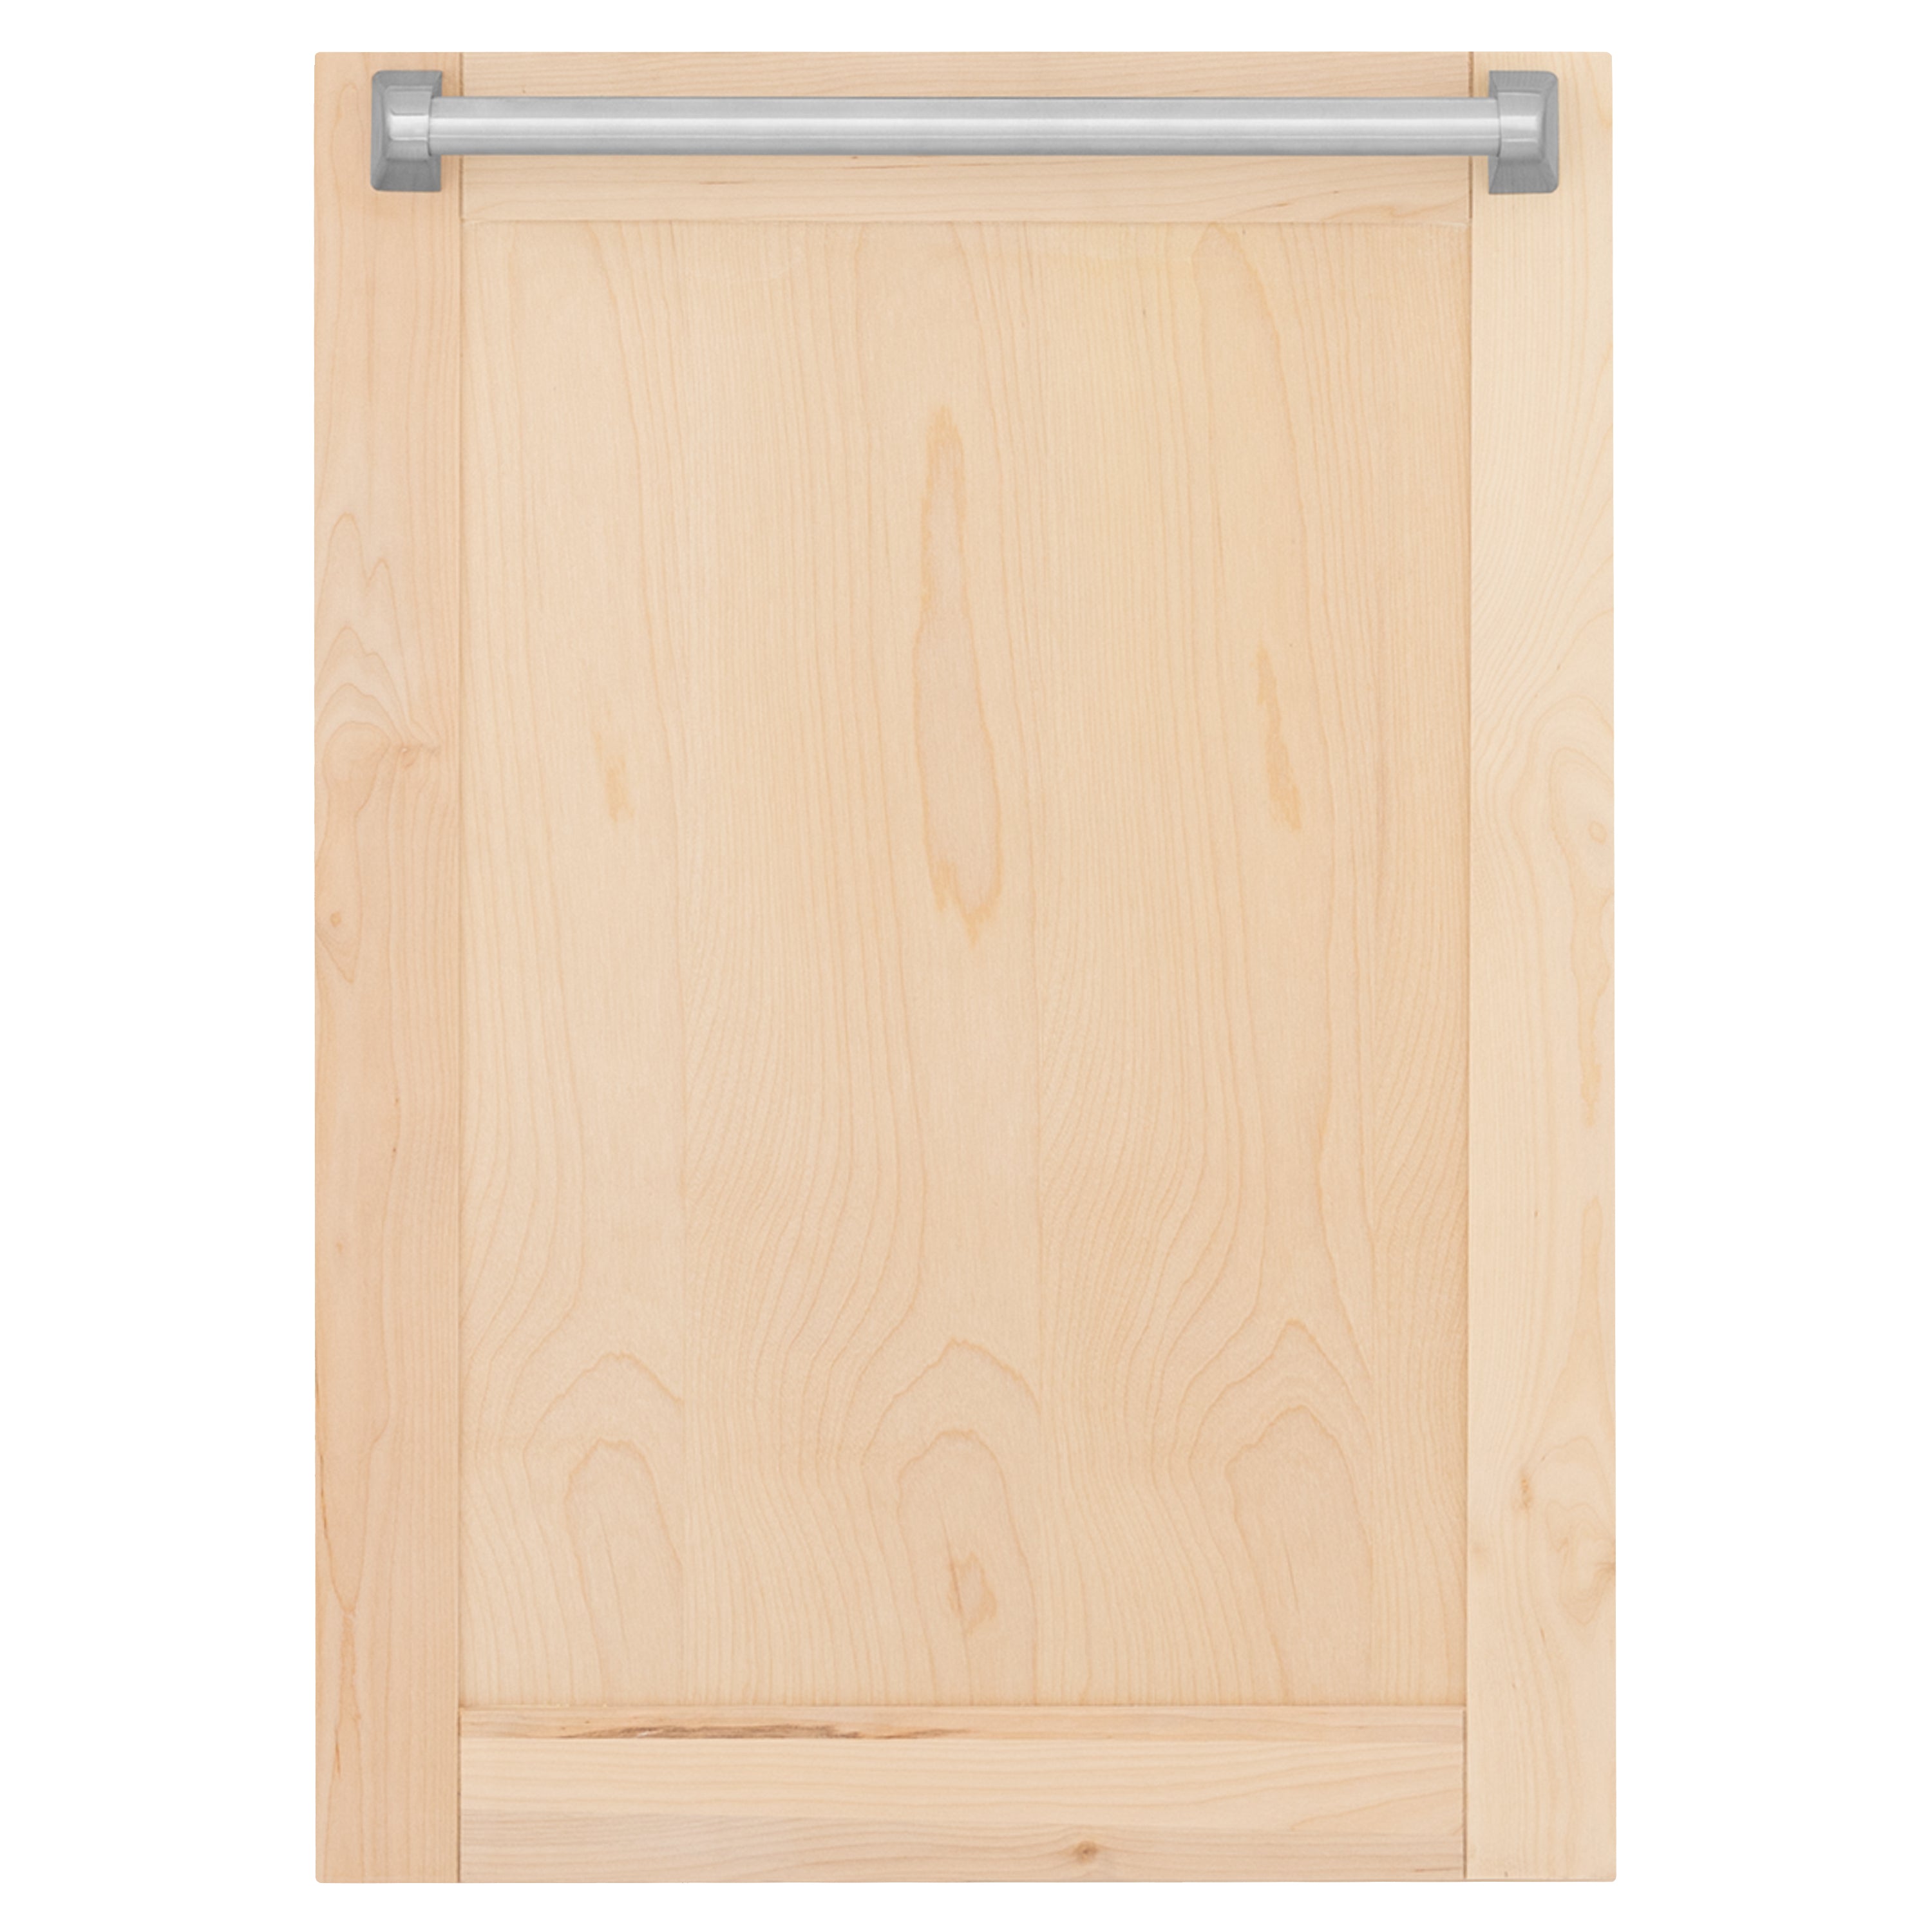 ZLINE 18" Tallac Dishwasher Panel in Unfinished Wood with Traditional Handle (DPV-UF-18)